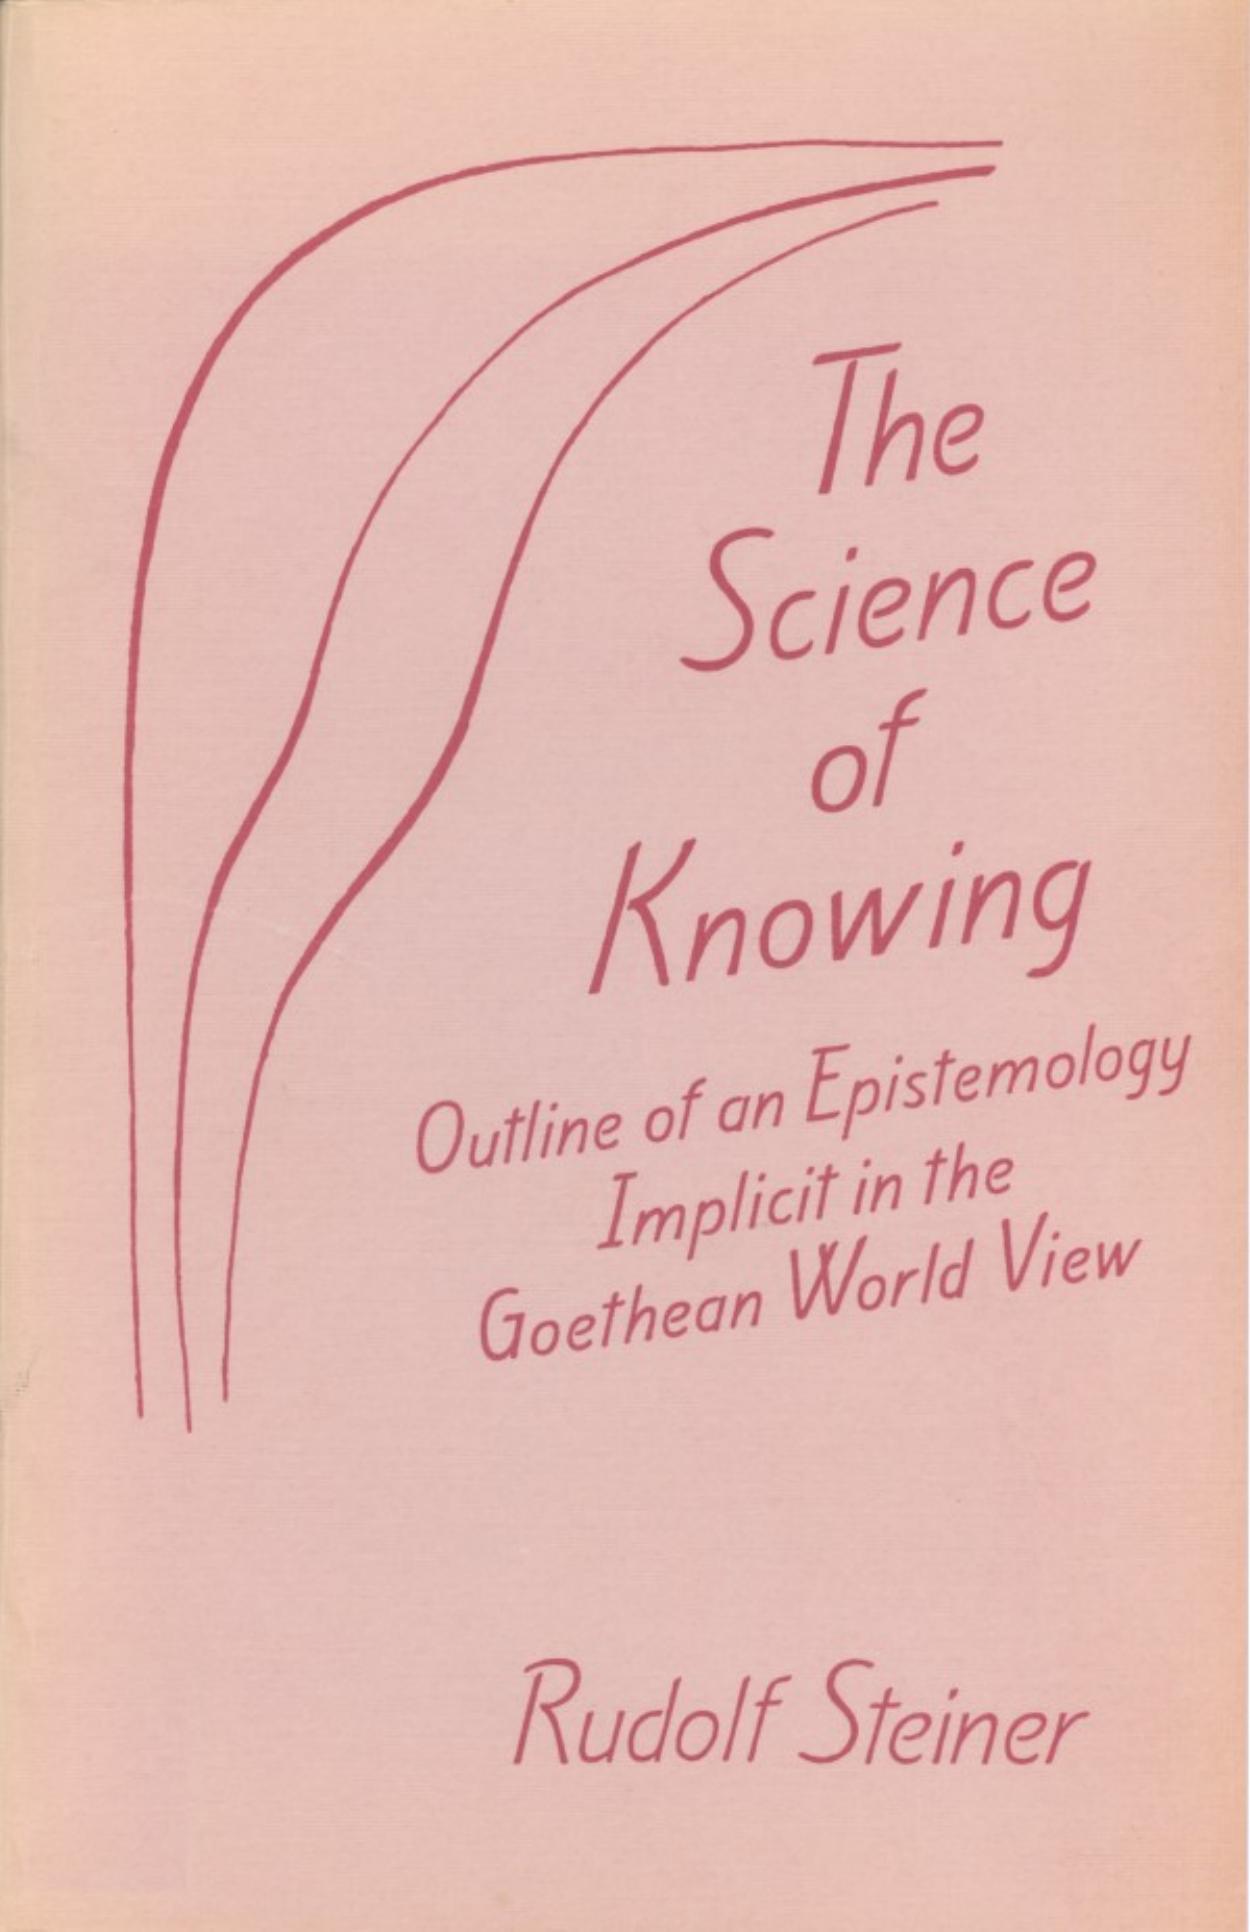 The Science of Knowing: Outline of an Epistemology Implicit in the Goethean World View : With Particular Reference to Schiller